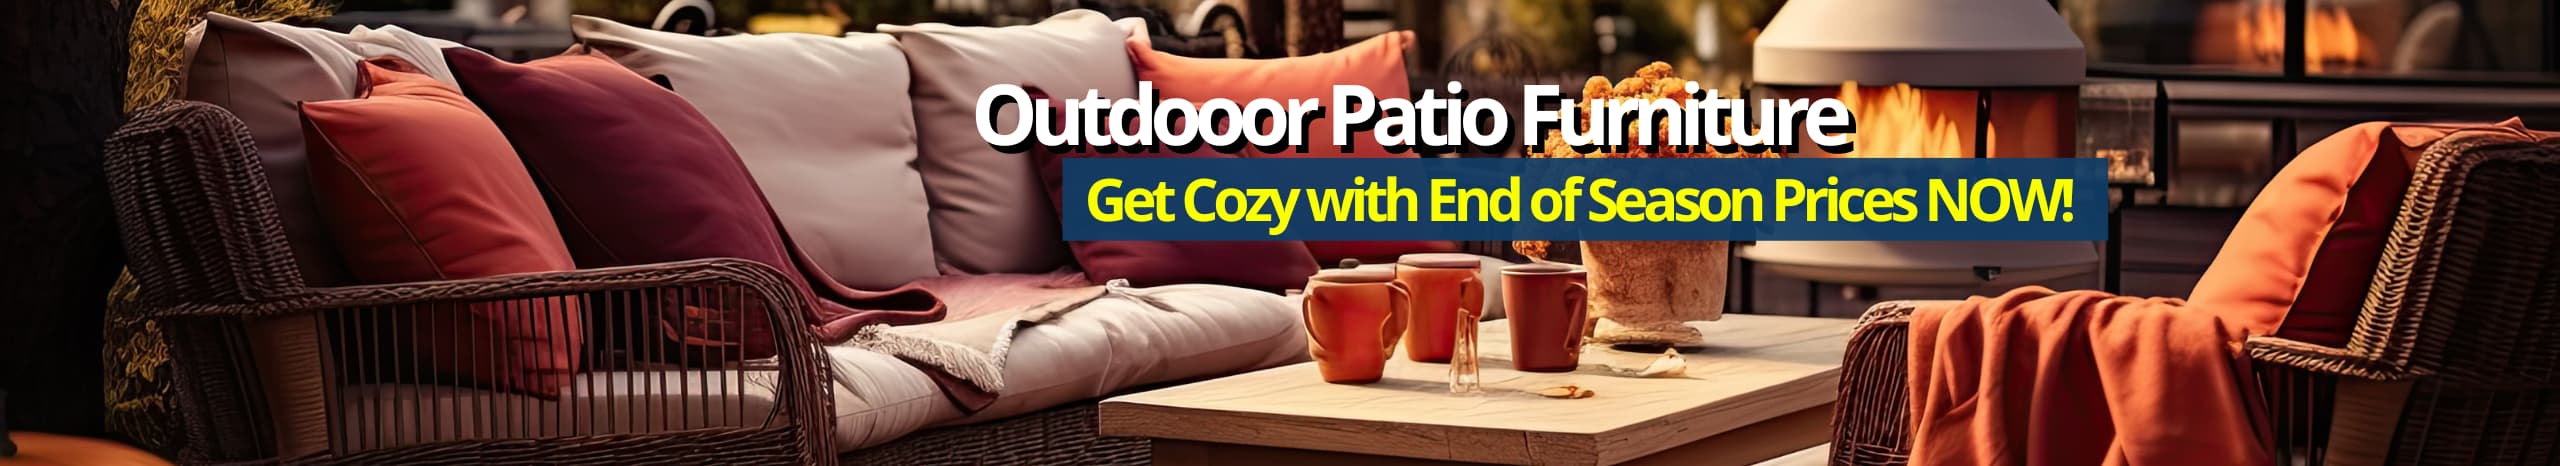 Outdoor Patio Furniture Stores